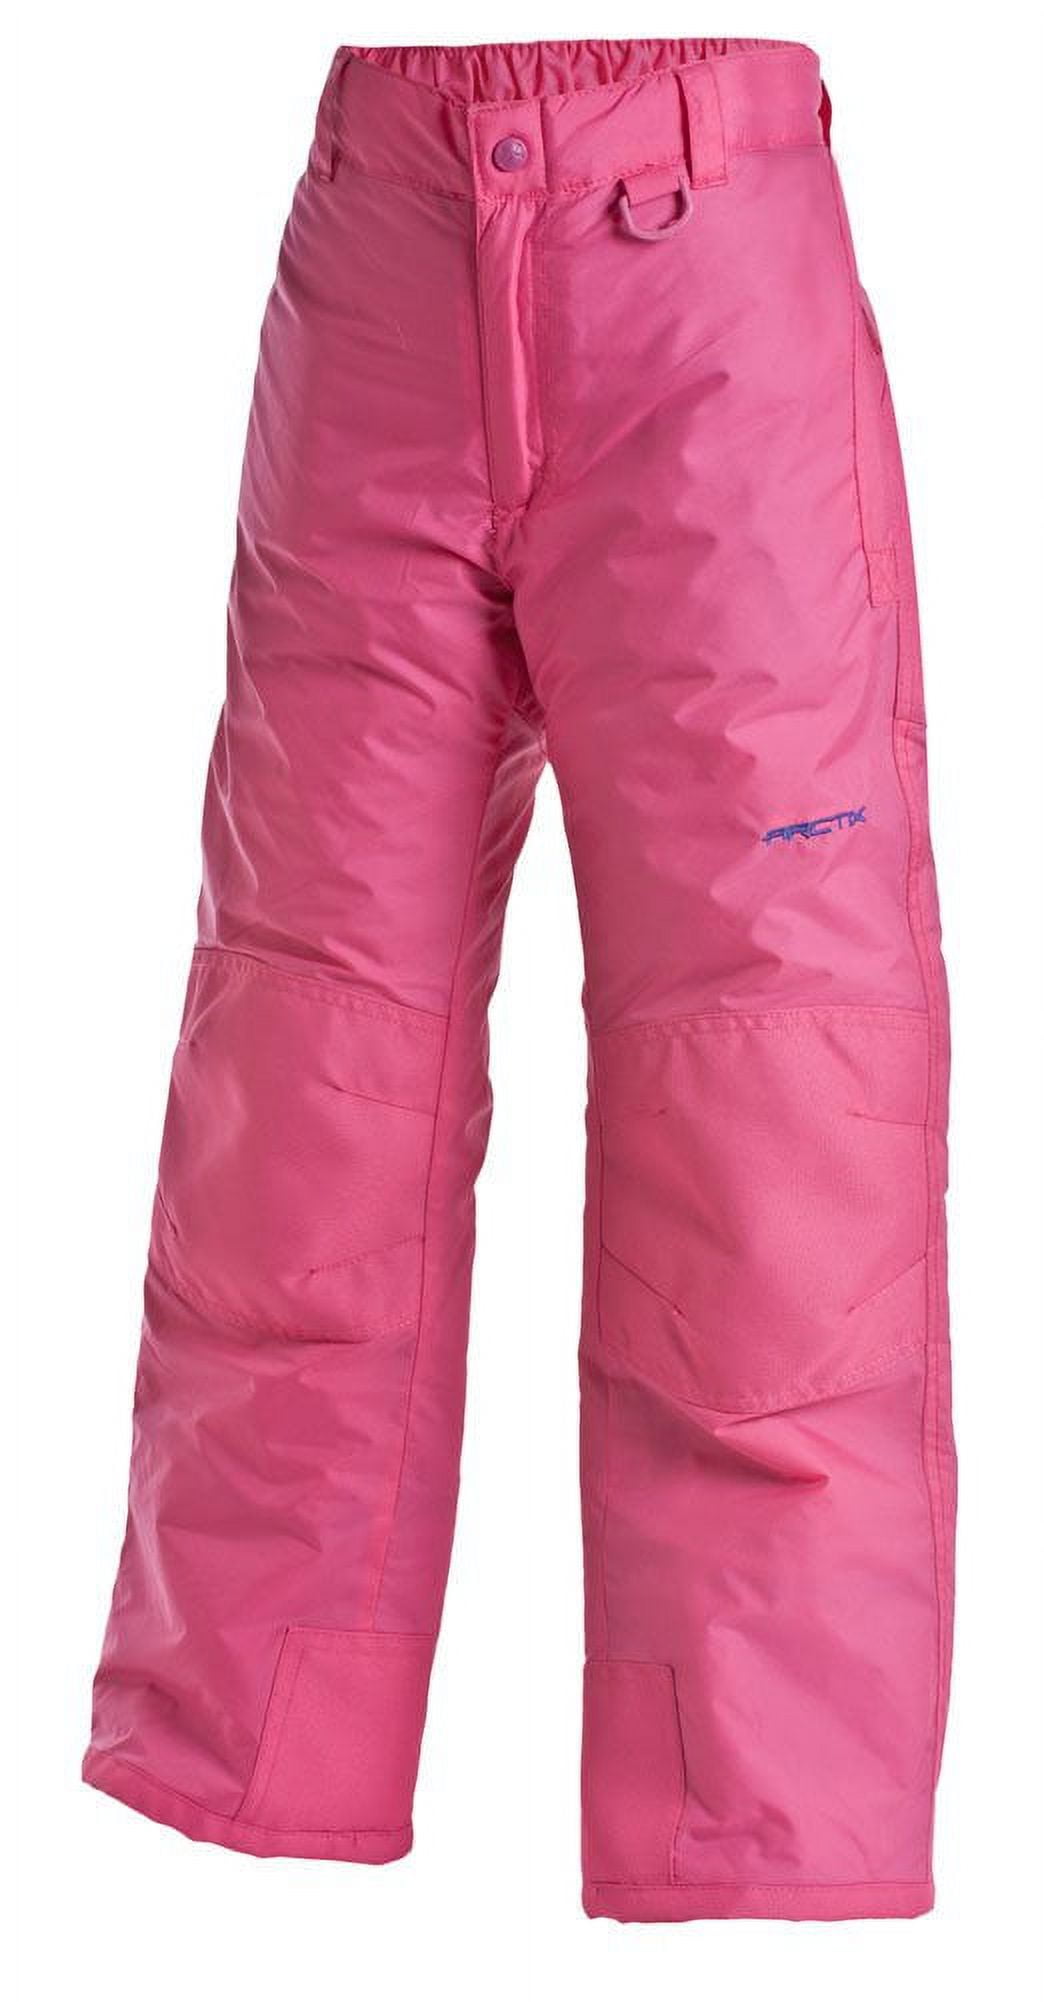 Arctix Youth Snow Pants with Reinforced Knees and Seat - Fuchsia